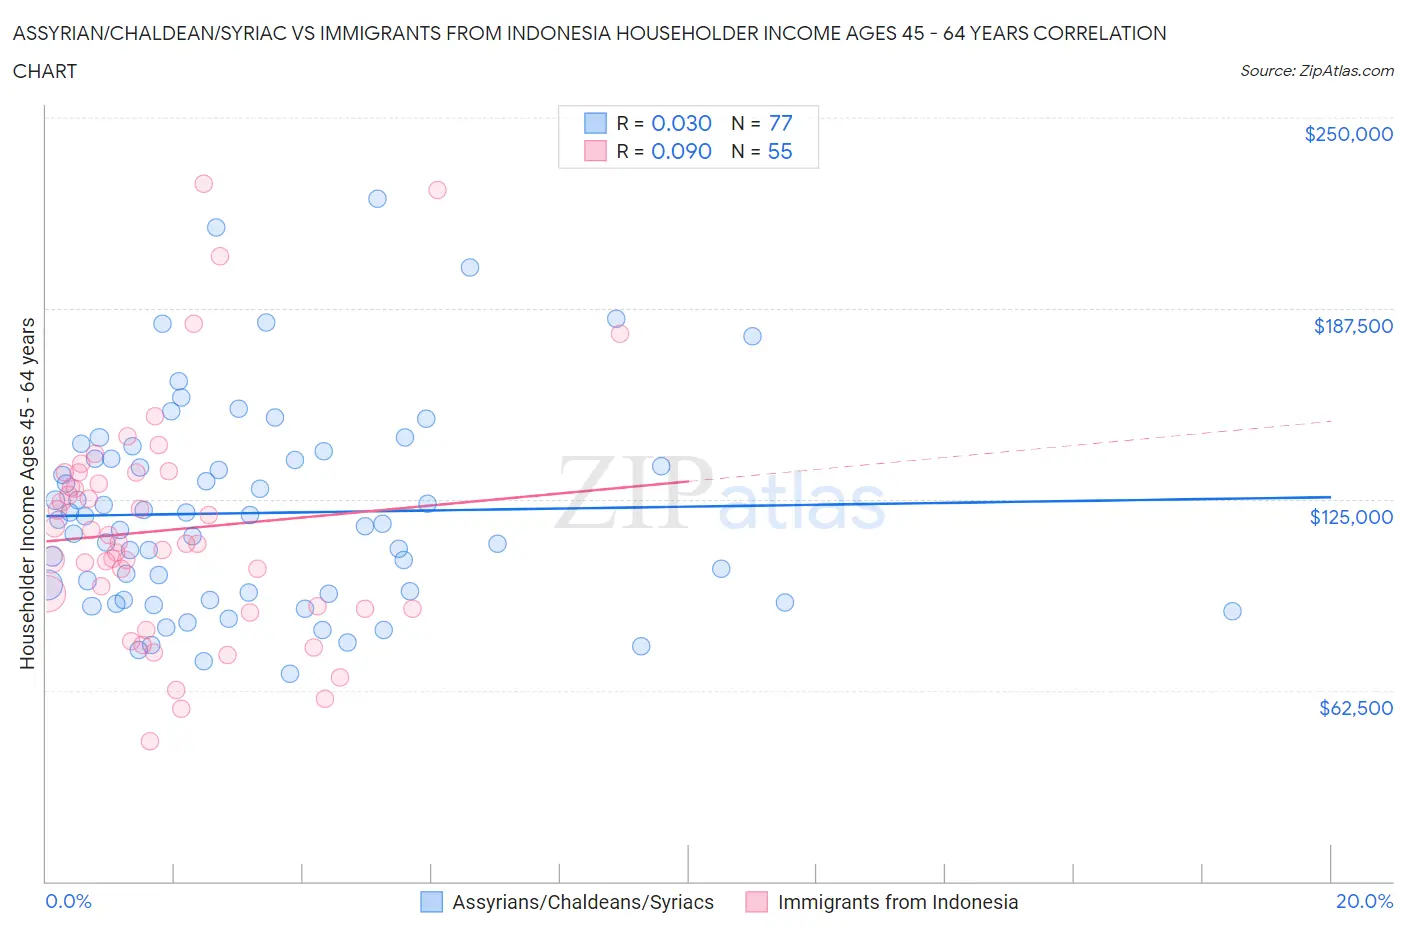 Assyrian/Chaldean/Syriac vs Immigrants from Indonesia Householder Income Ages 45 - 64 years